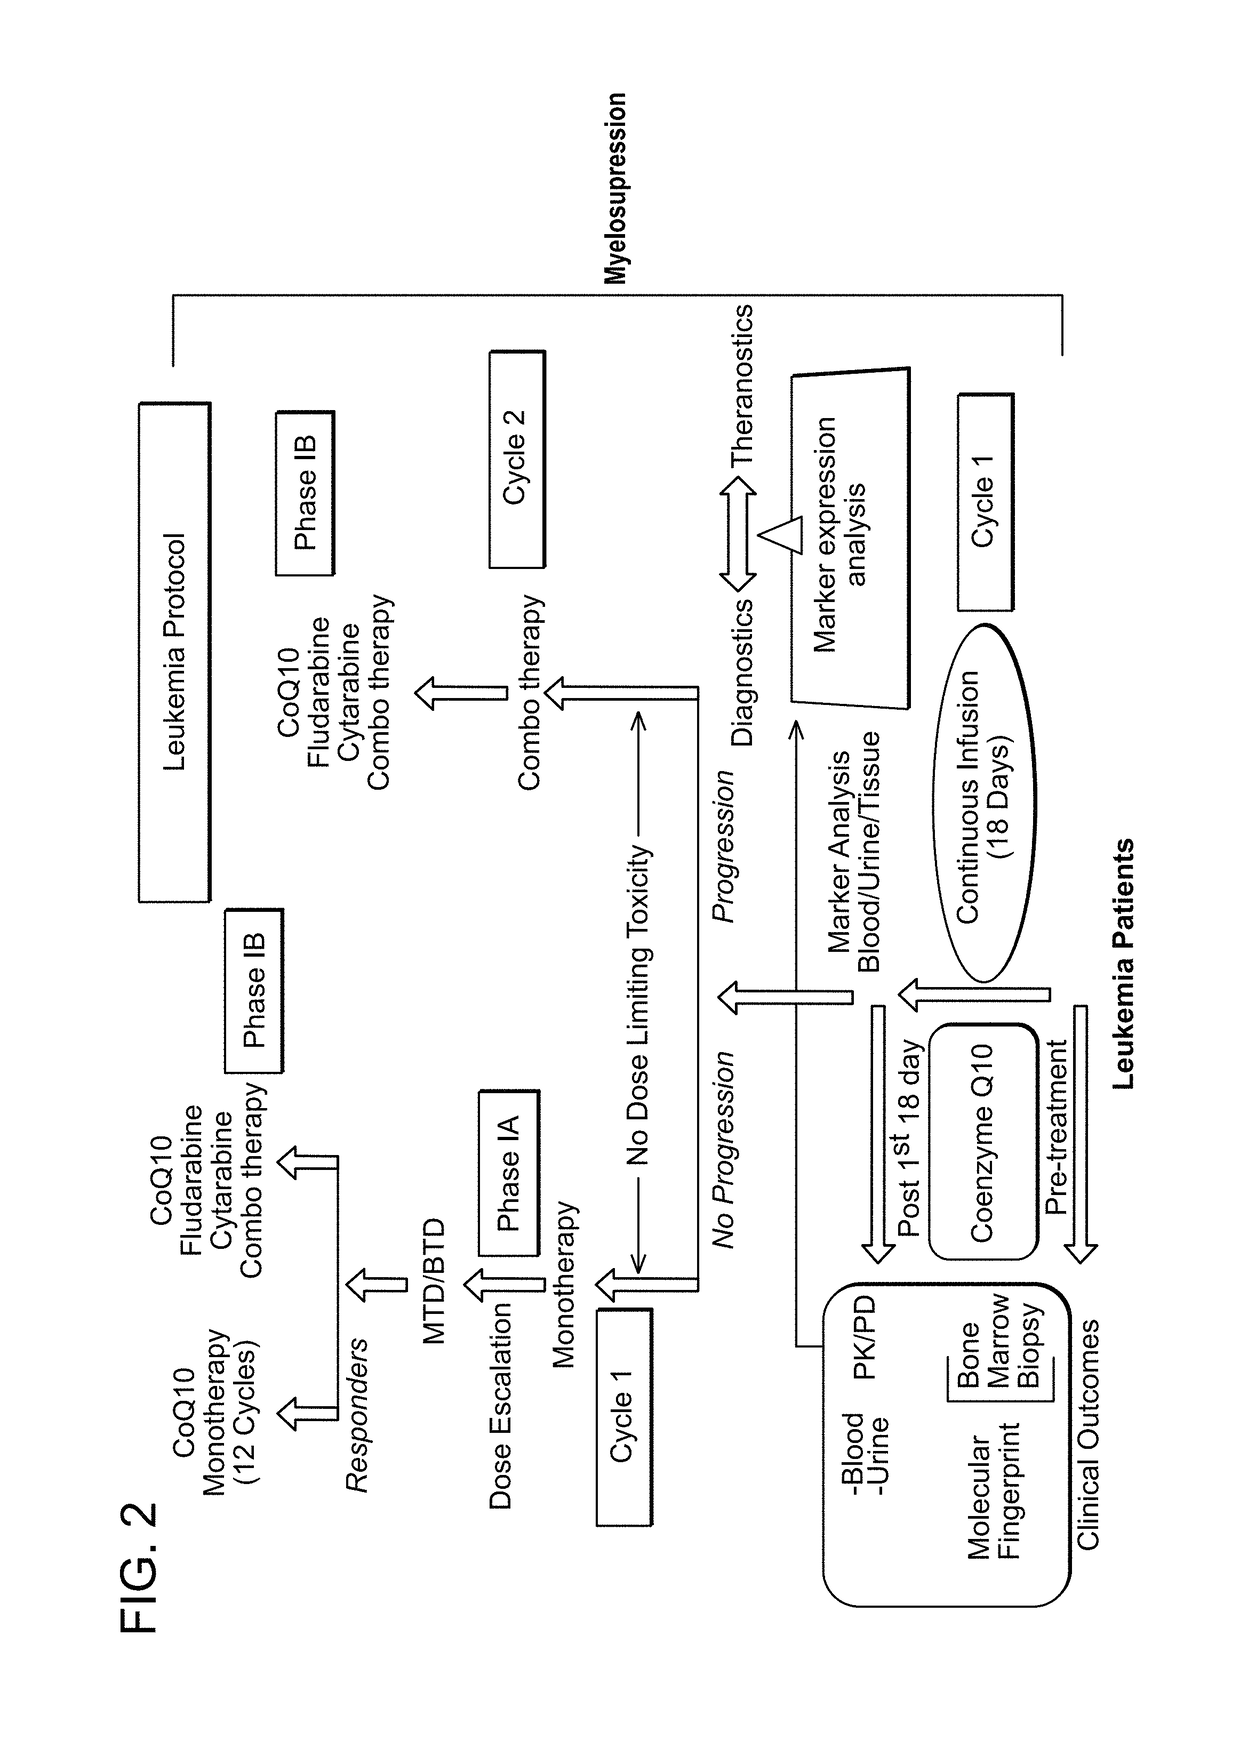 Methods of treatment of cancer by continuous infusion of coenzyme Q10